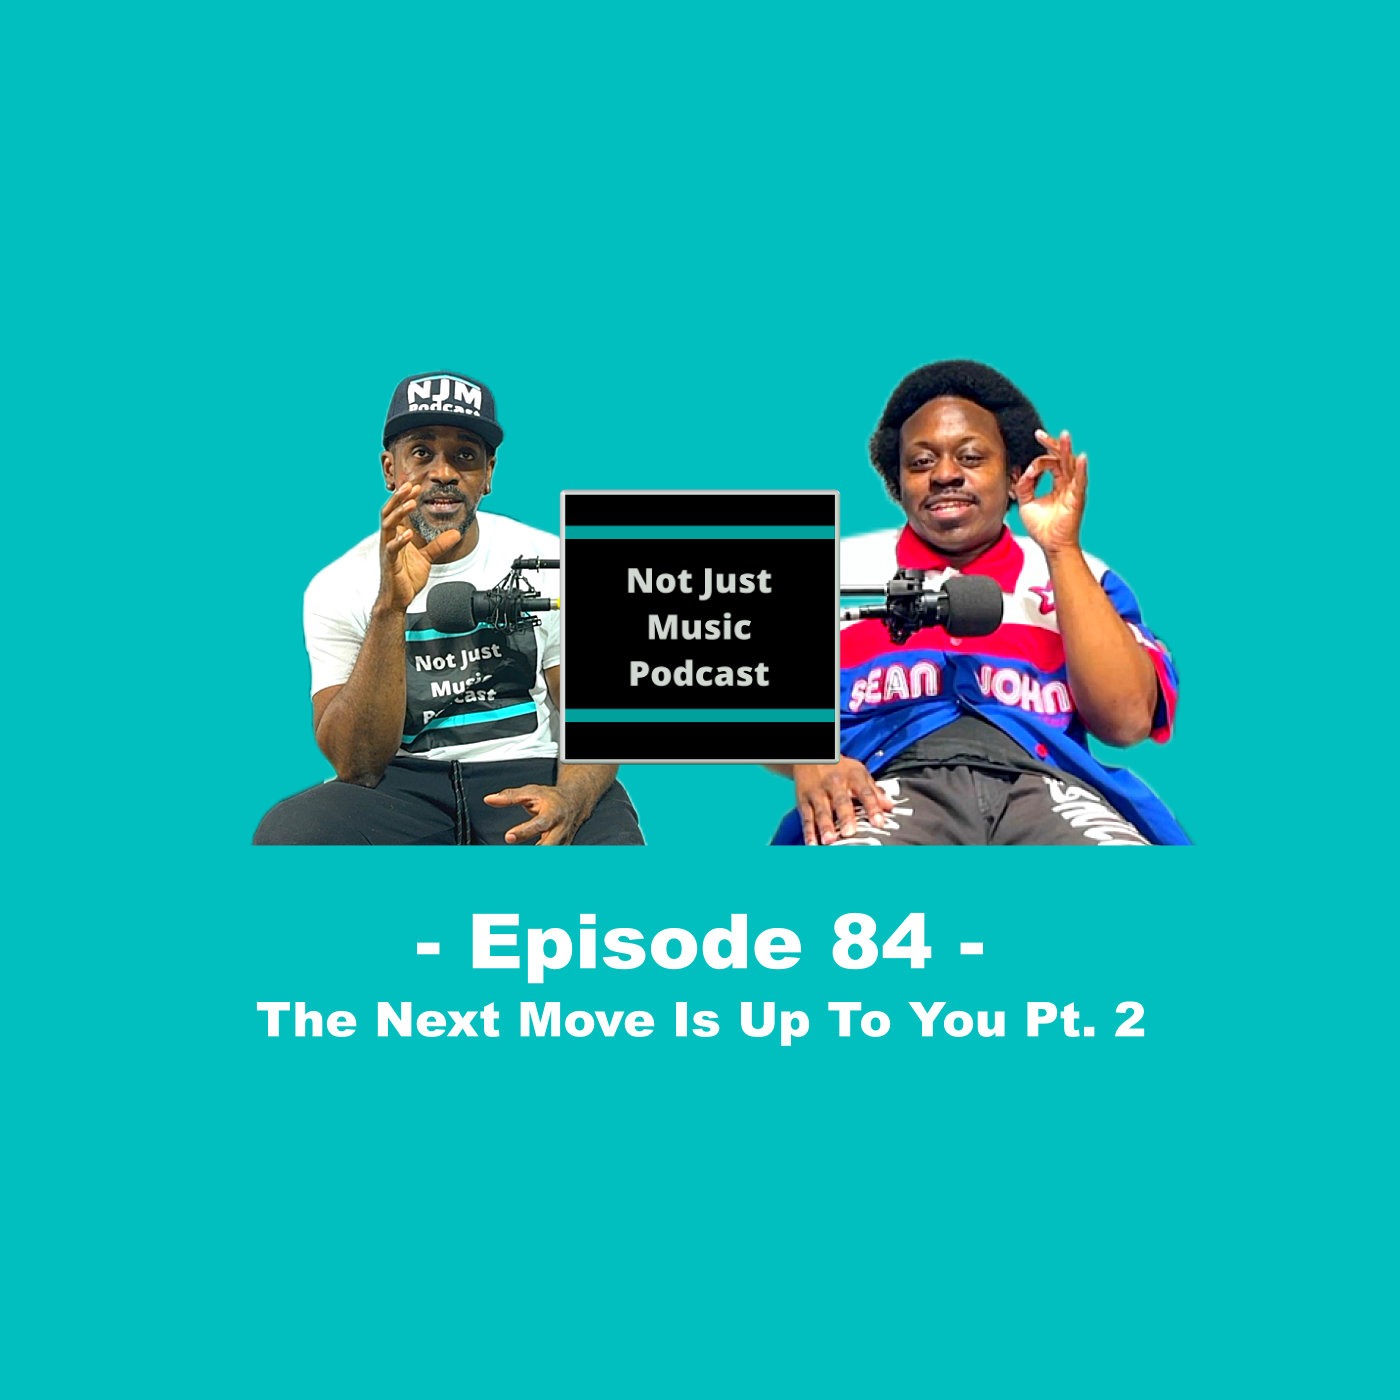 The Next Move Is Up To You Part 2 ft Duan & Q - Episode 84